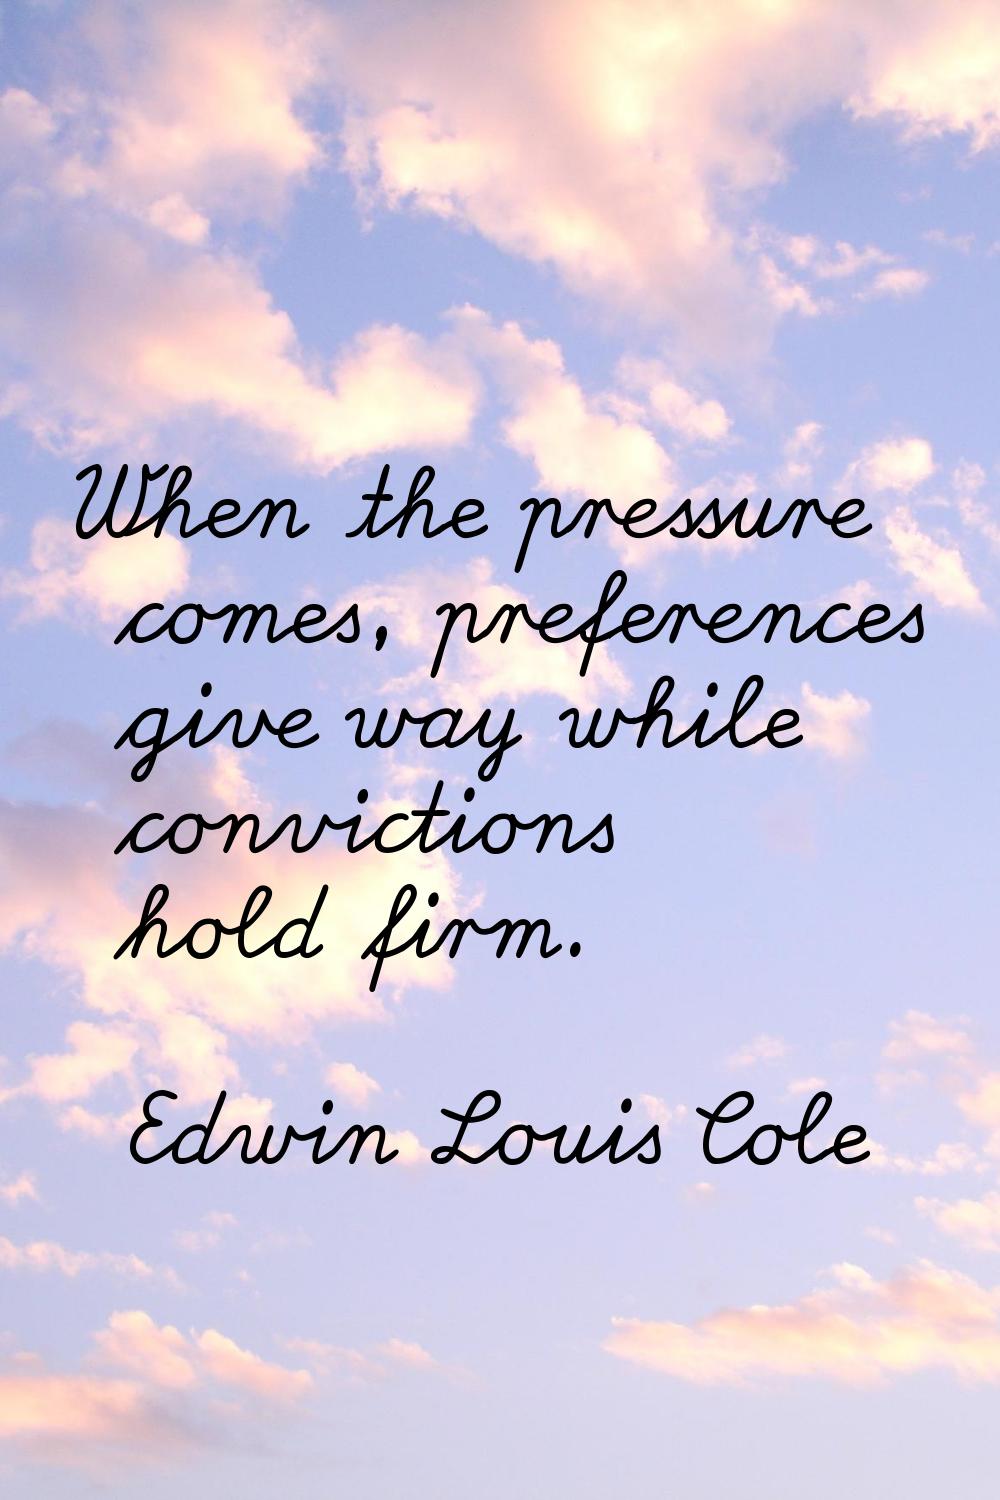 When the pressure comes, preferences give way while convictions hold firm.